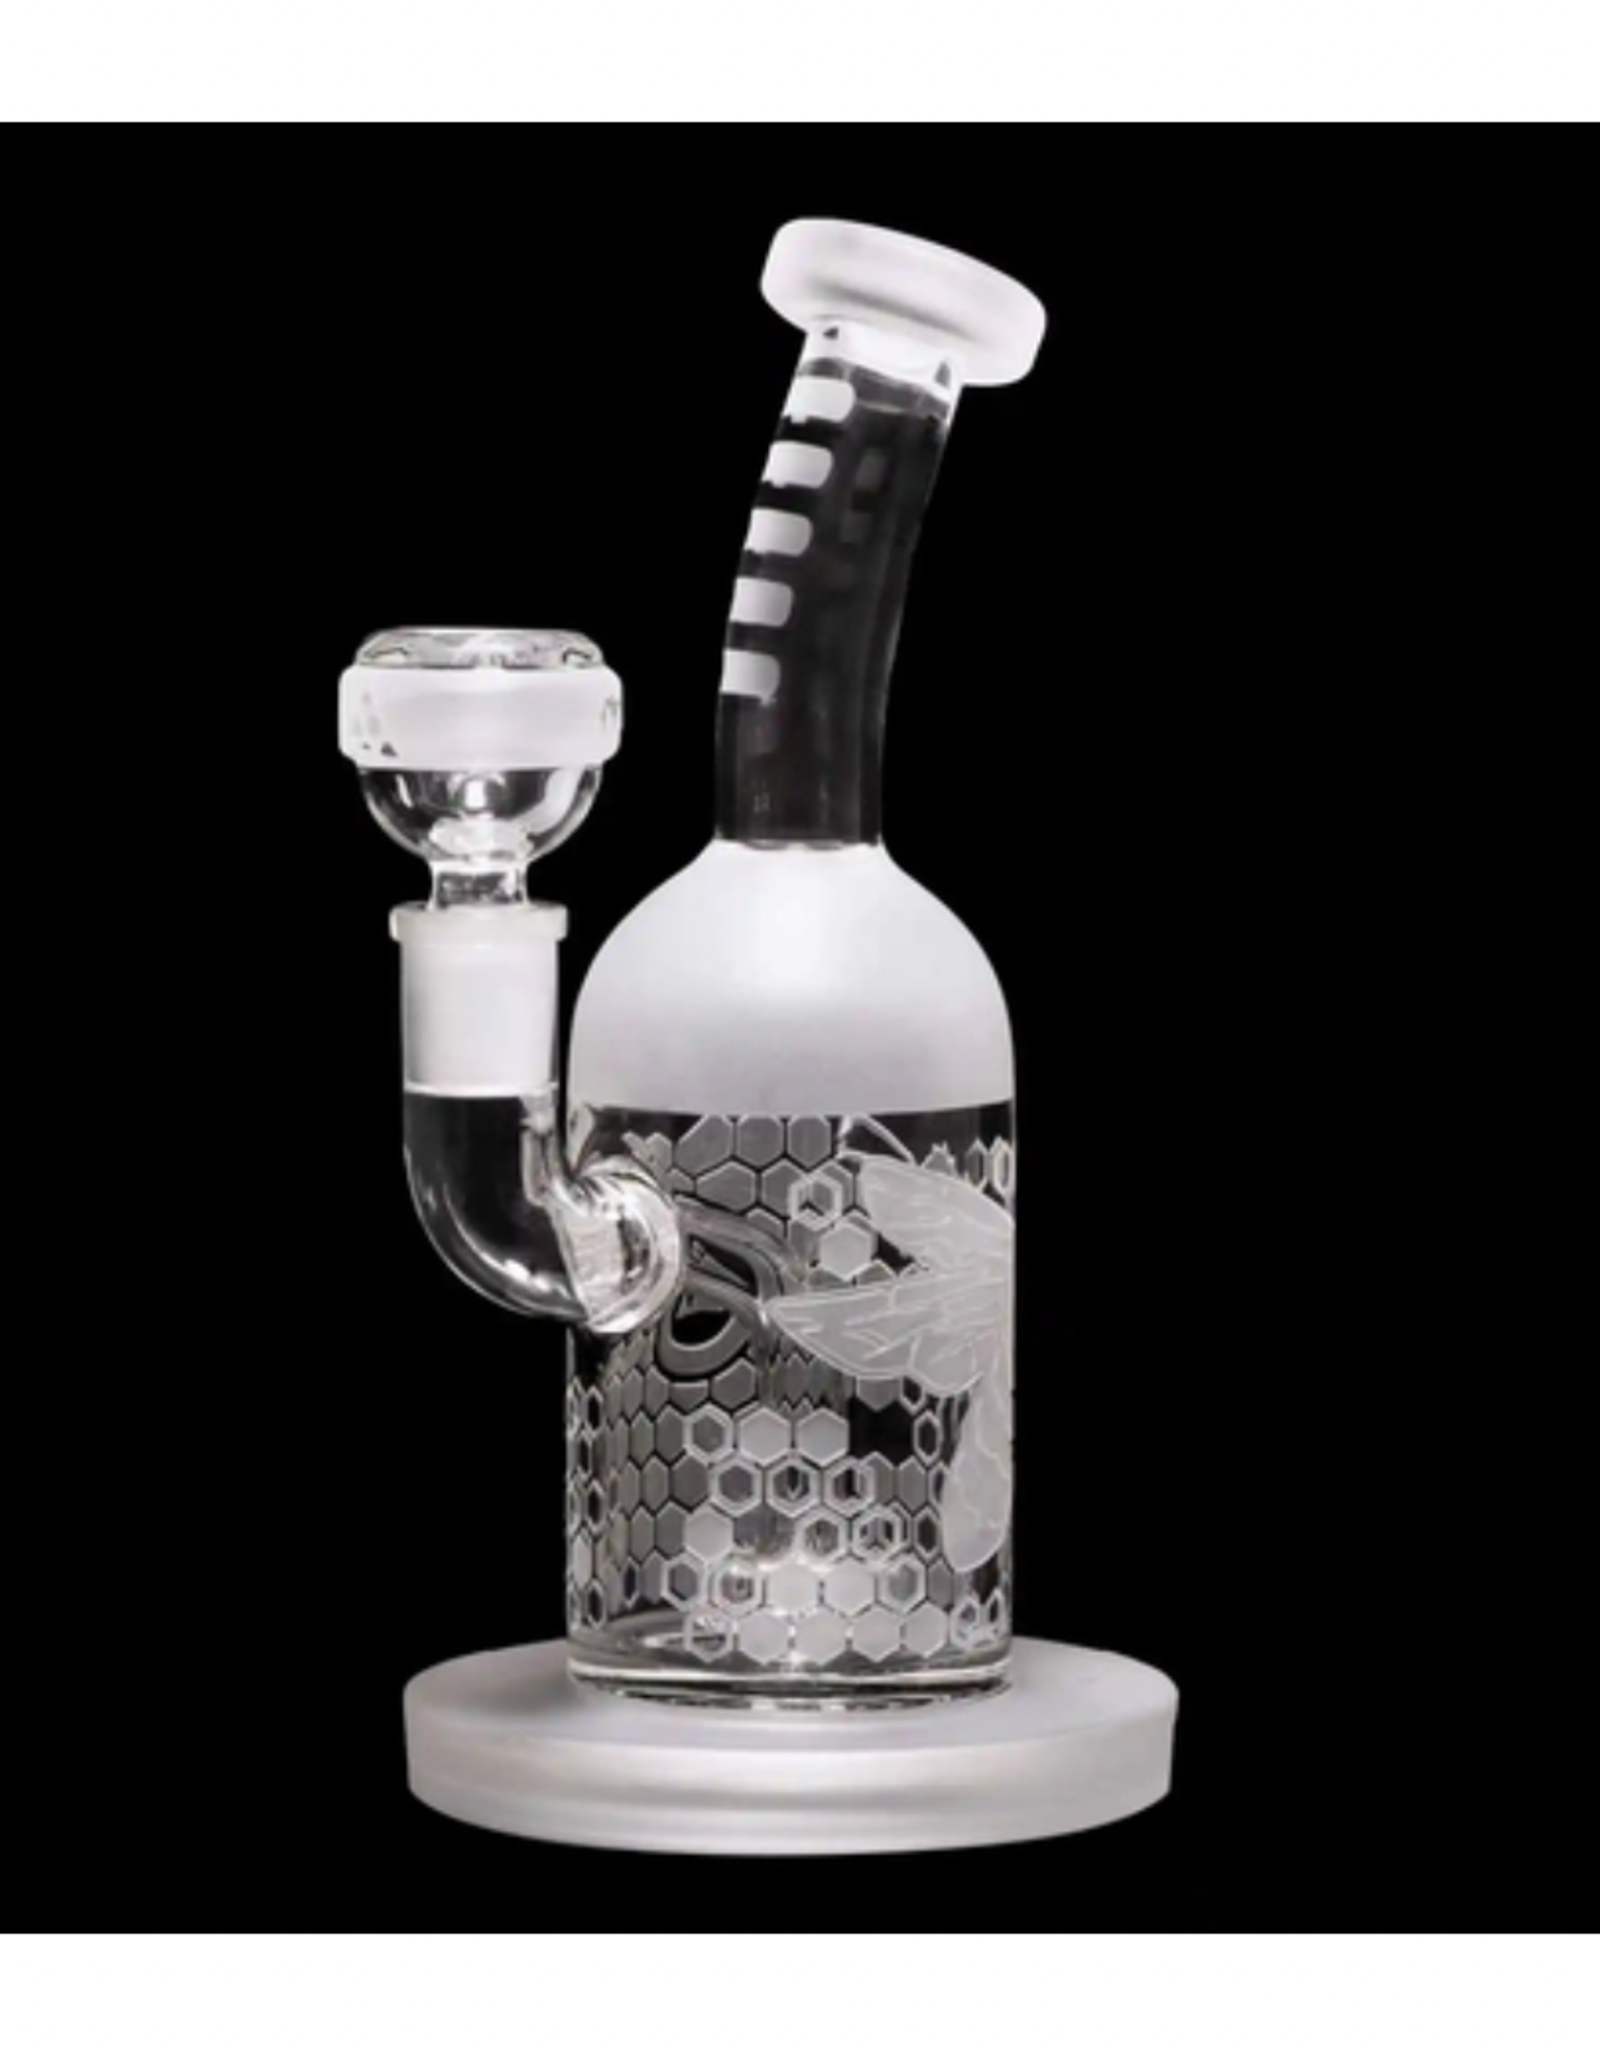 8" Bee Hive Rig by Milkyway Glass